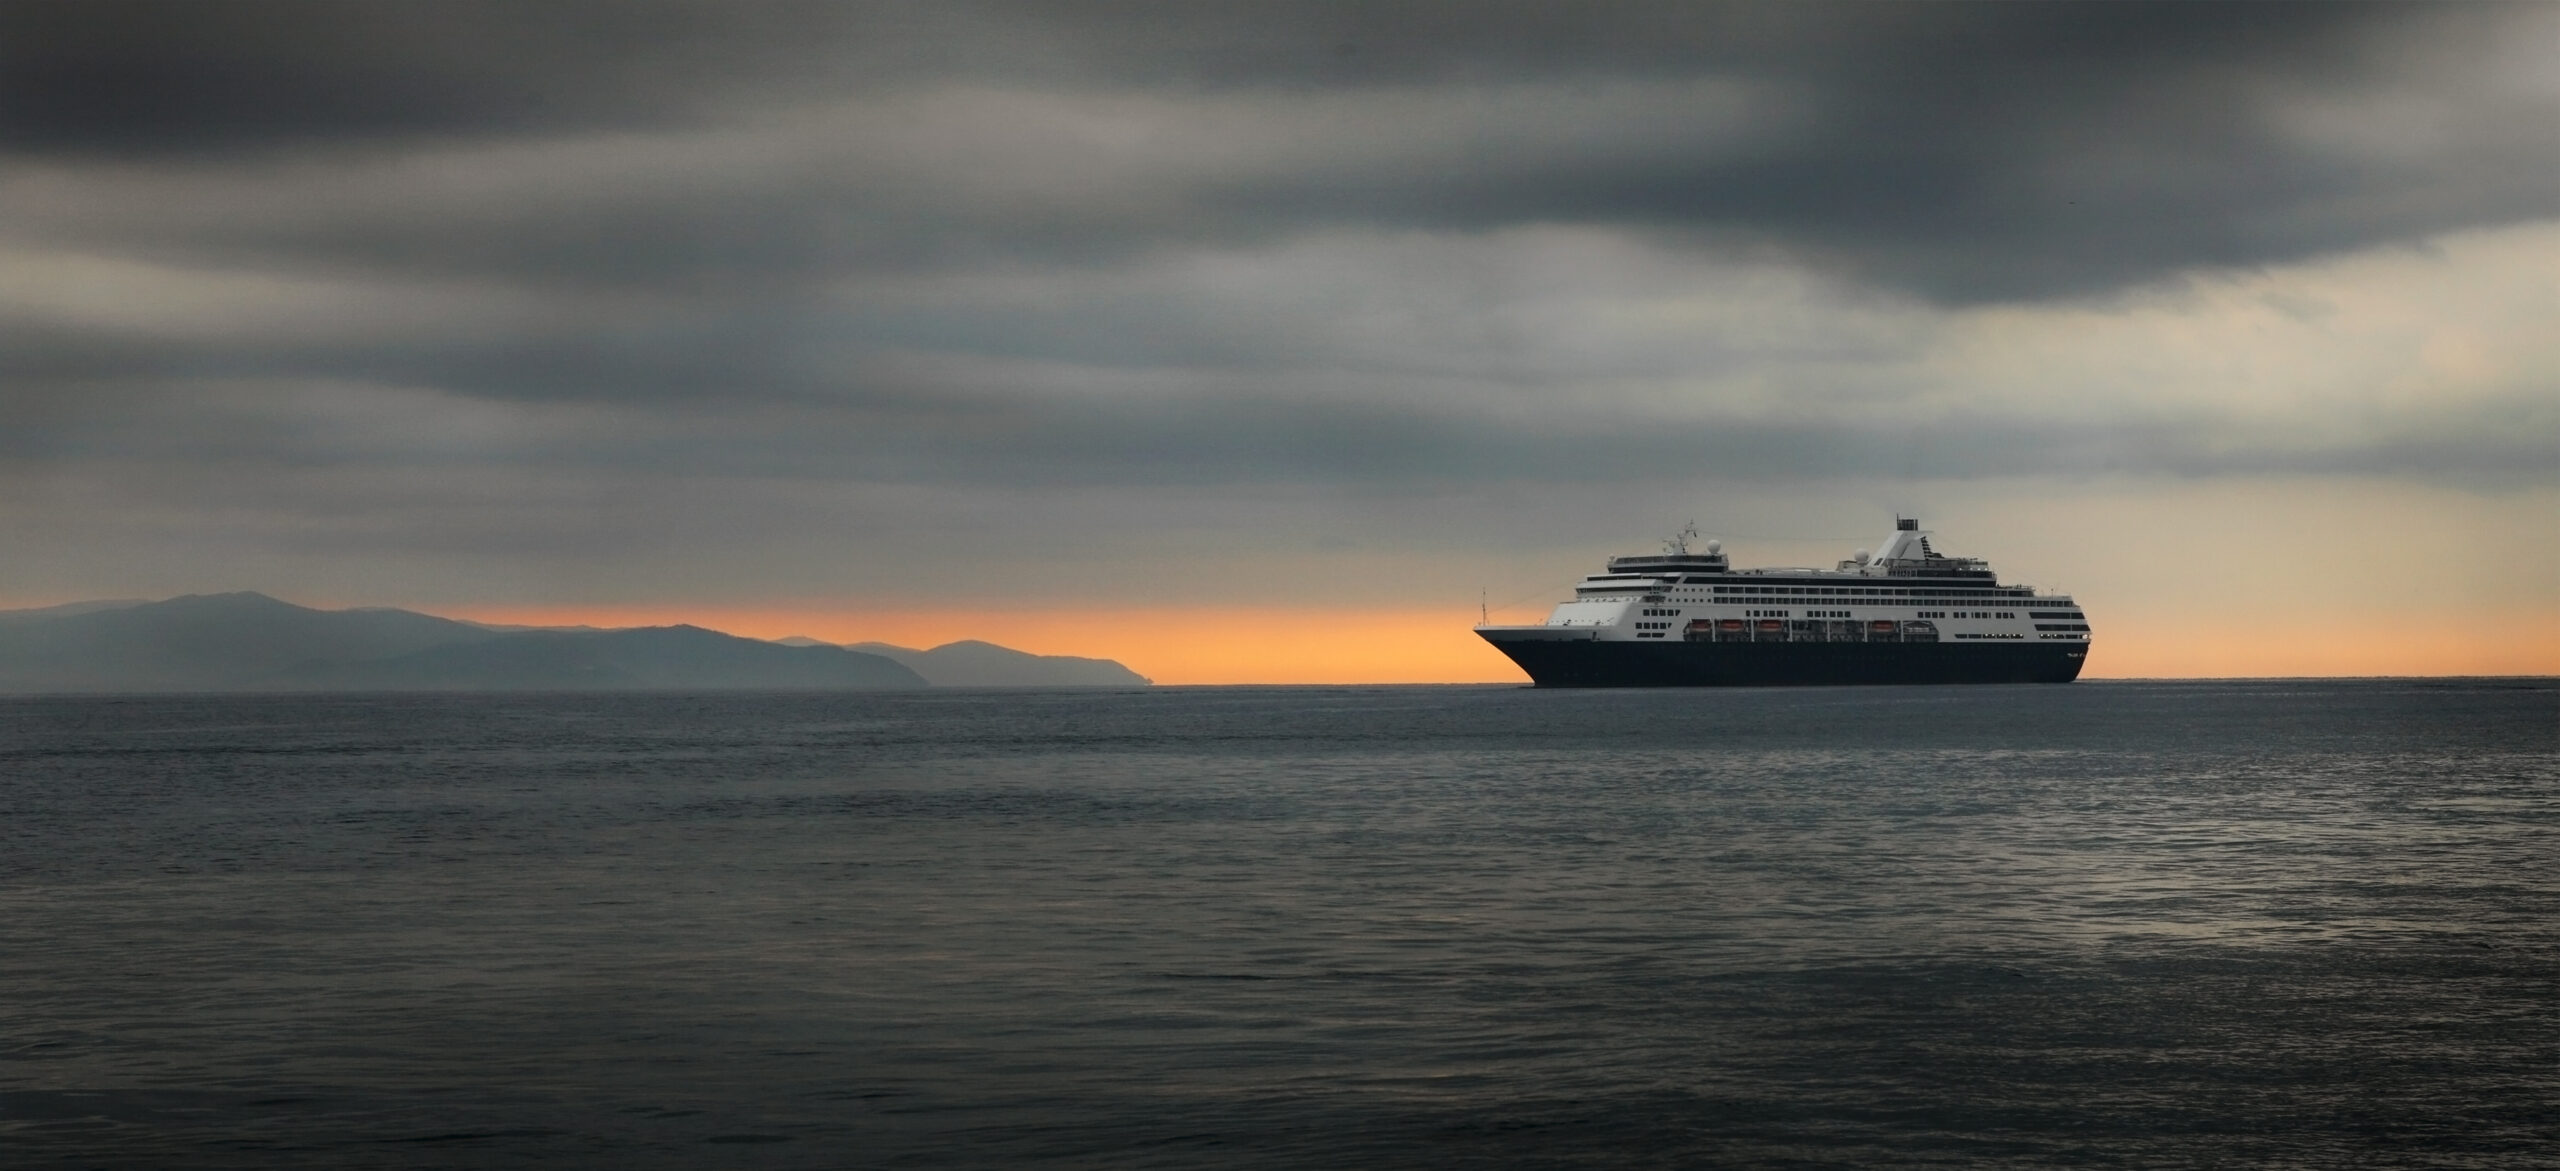 Big cruise ship in a grey water at the sunrise